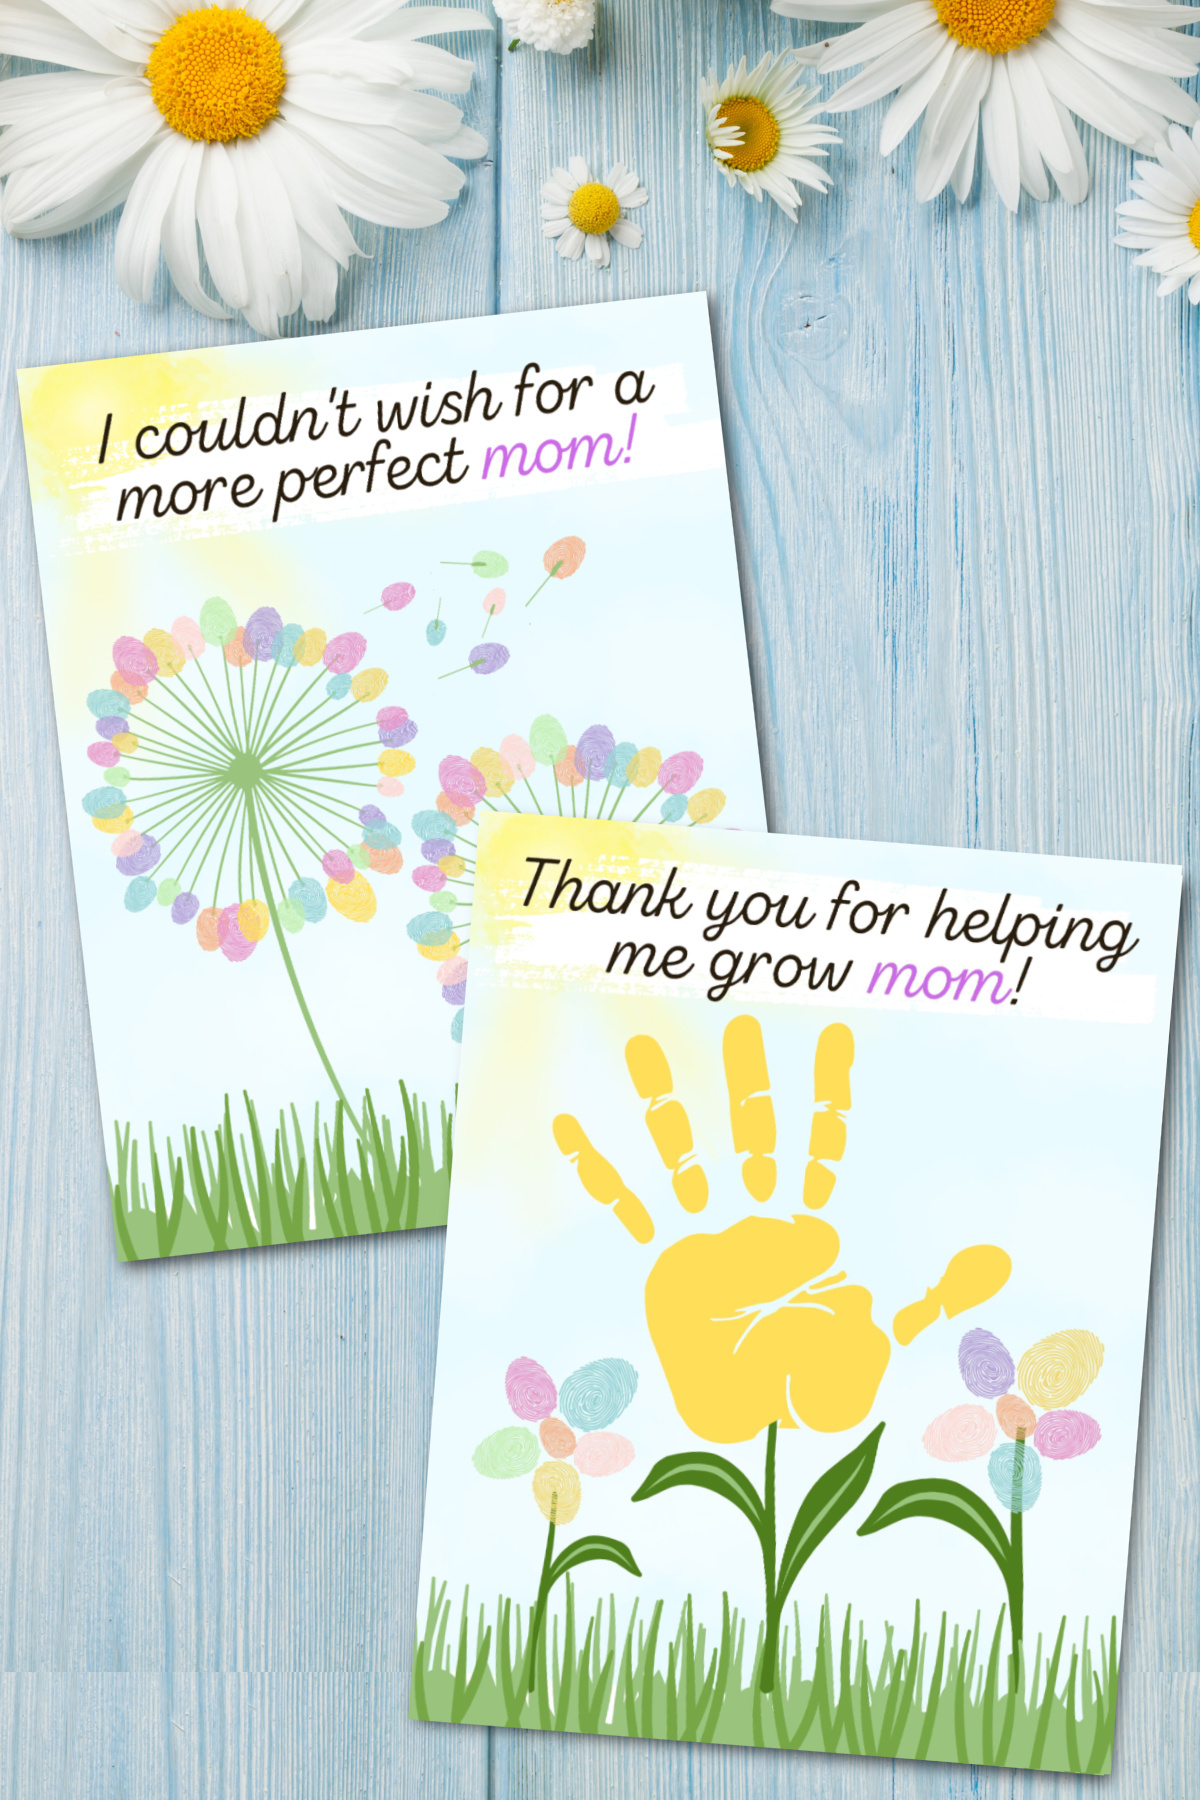 Two mother's day cards on a wooden surface, one with a floral design reading "i couldn't wish for a more perfect mom!" and another with a handprint design saying "thank you for helping me grow mom!.